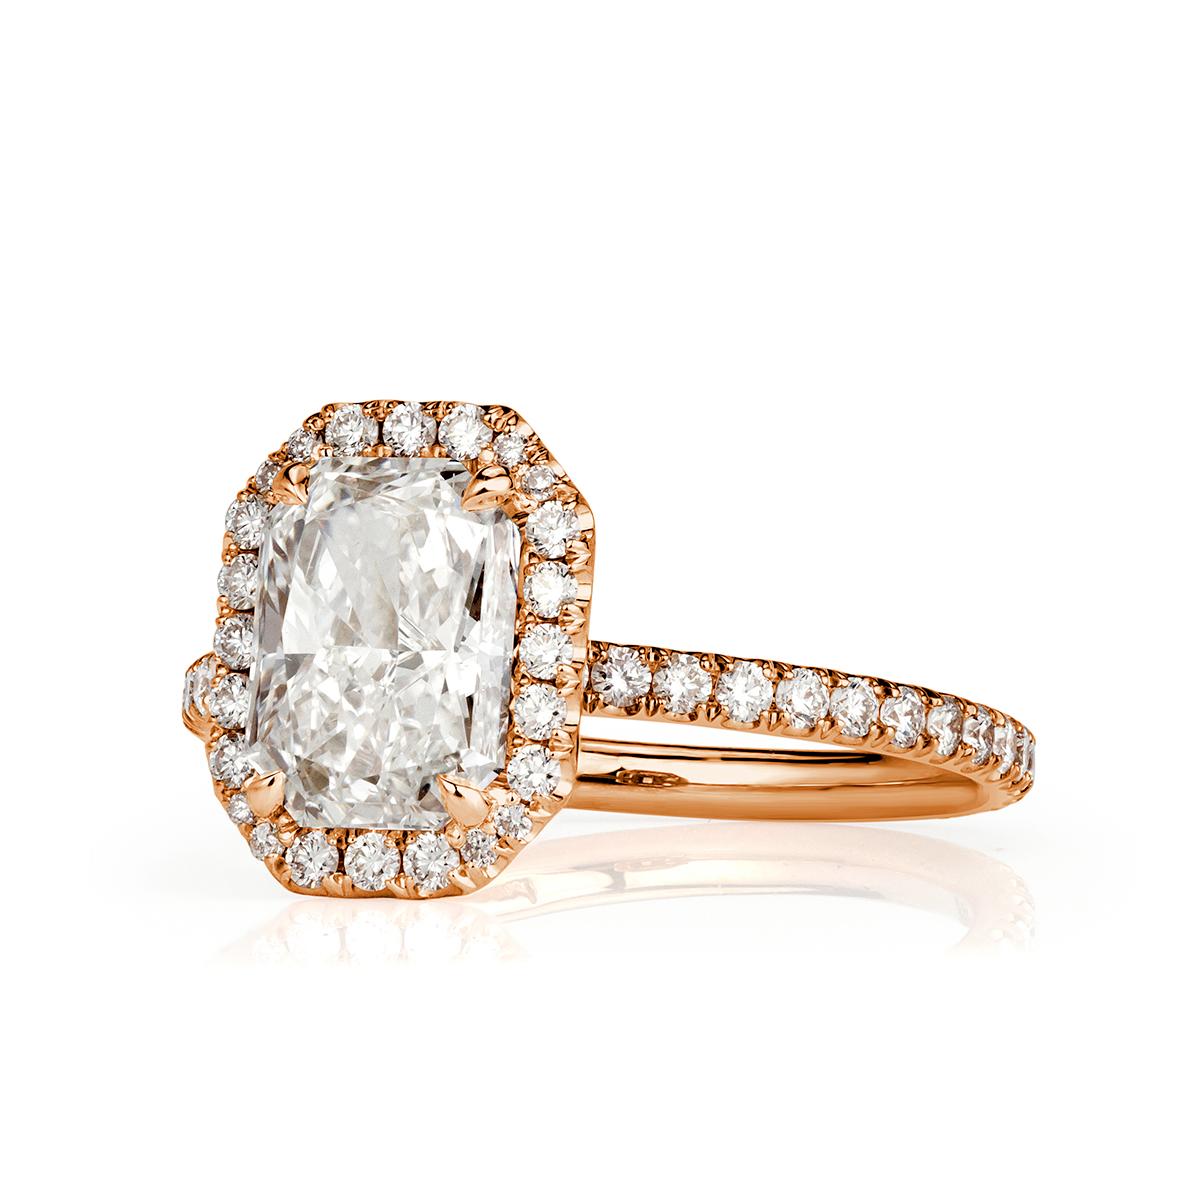 Mark Broumand 2.46 Carat Radiant Cut Diamond Engagement Ring In New Condition For Sale In Los Angeles, CA